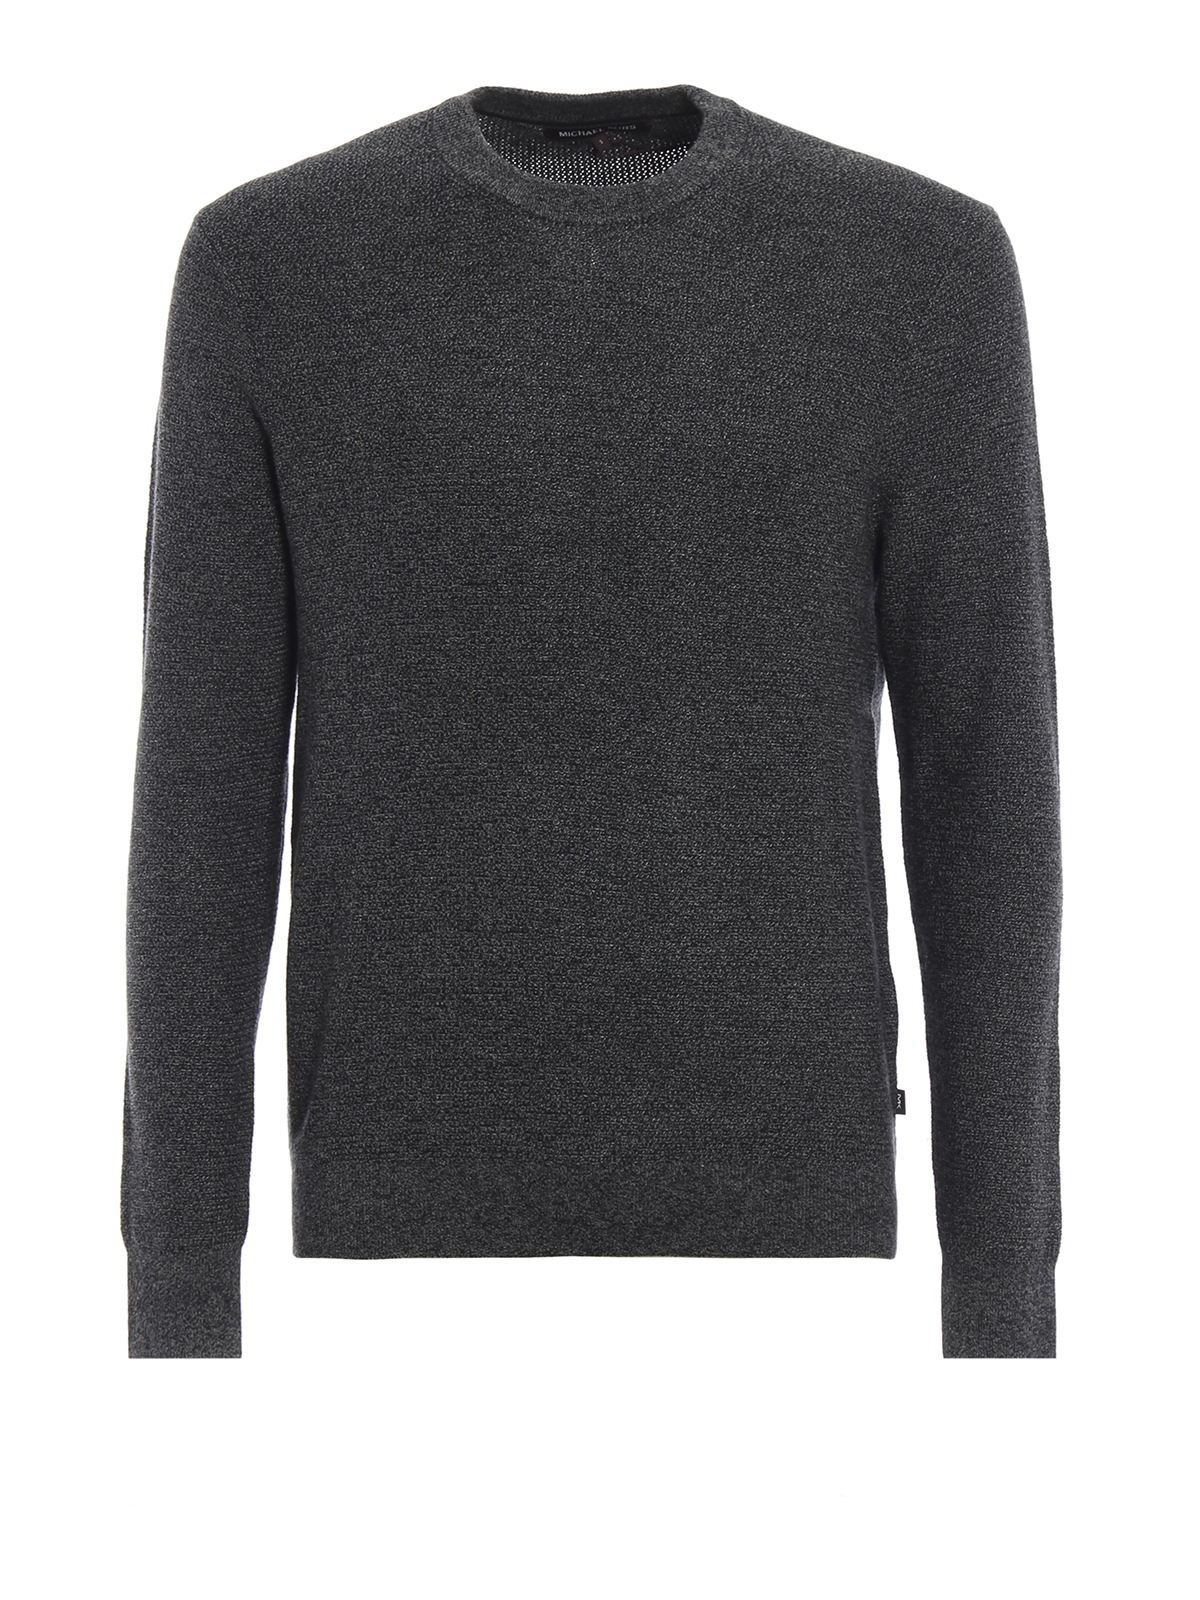 Michael Kors Ash Grey Soft Cotton And Wool Sweater In Gray